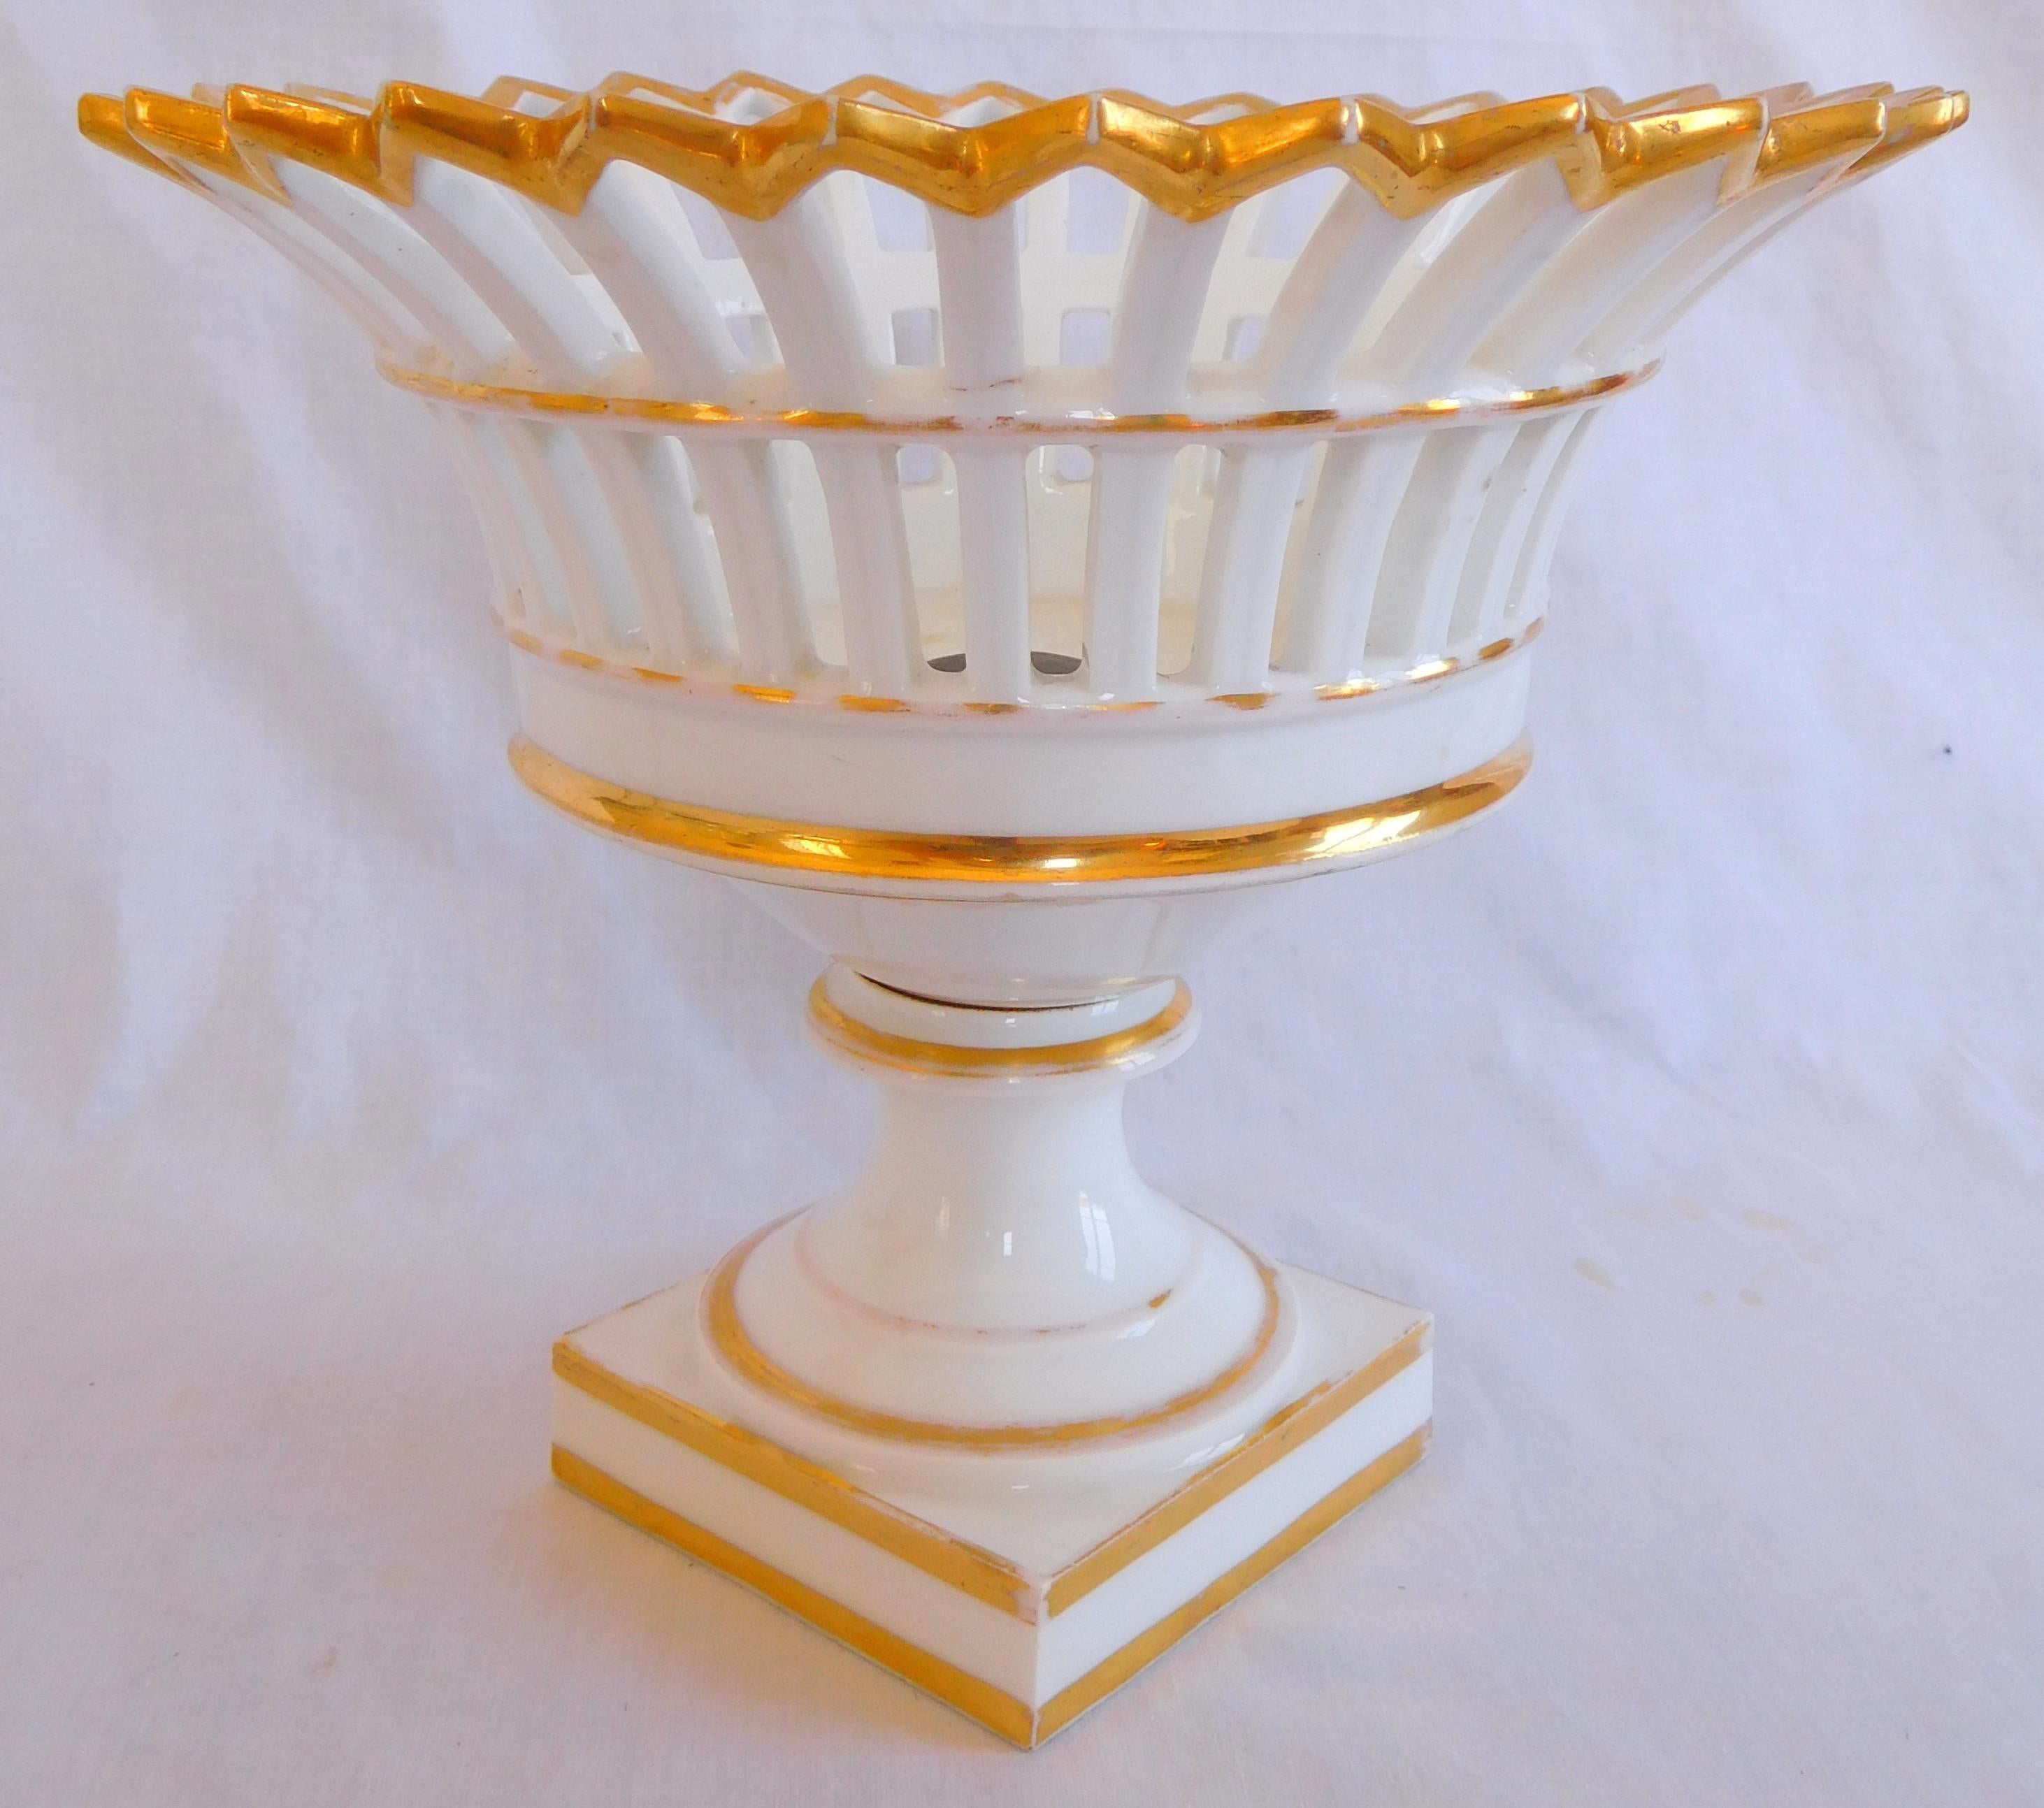 Empire Paris porcelain pierced bowl enhanced with fine gold, early 19th century production circa 1830 (French Restauration period).

Our cup is ideal to be used as a fruit bowl (this type of fruit bowl with the piercing prevents the fruit from